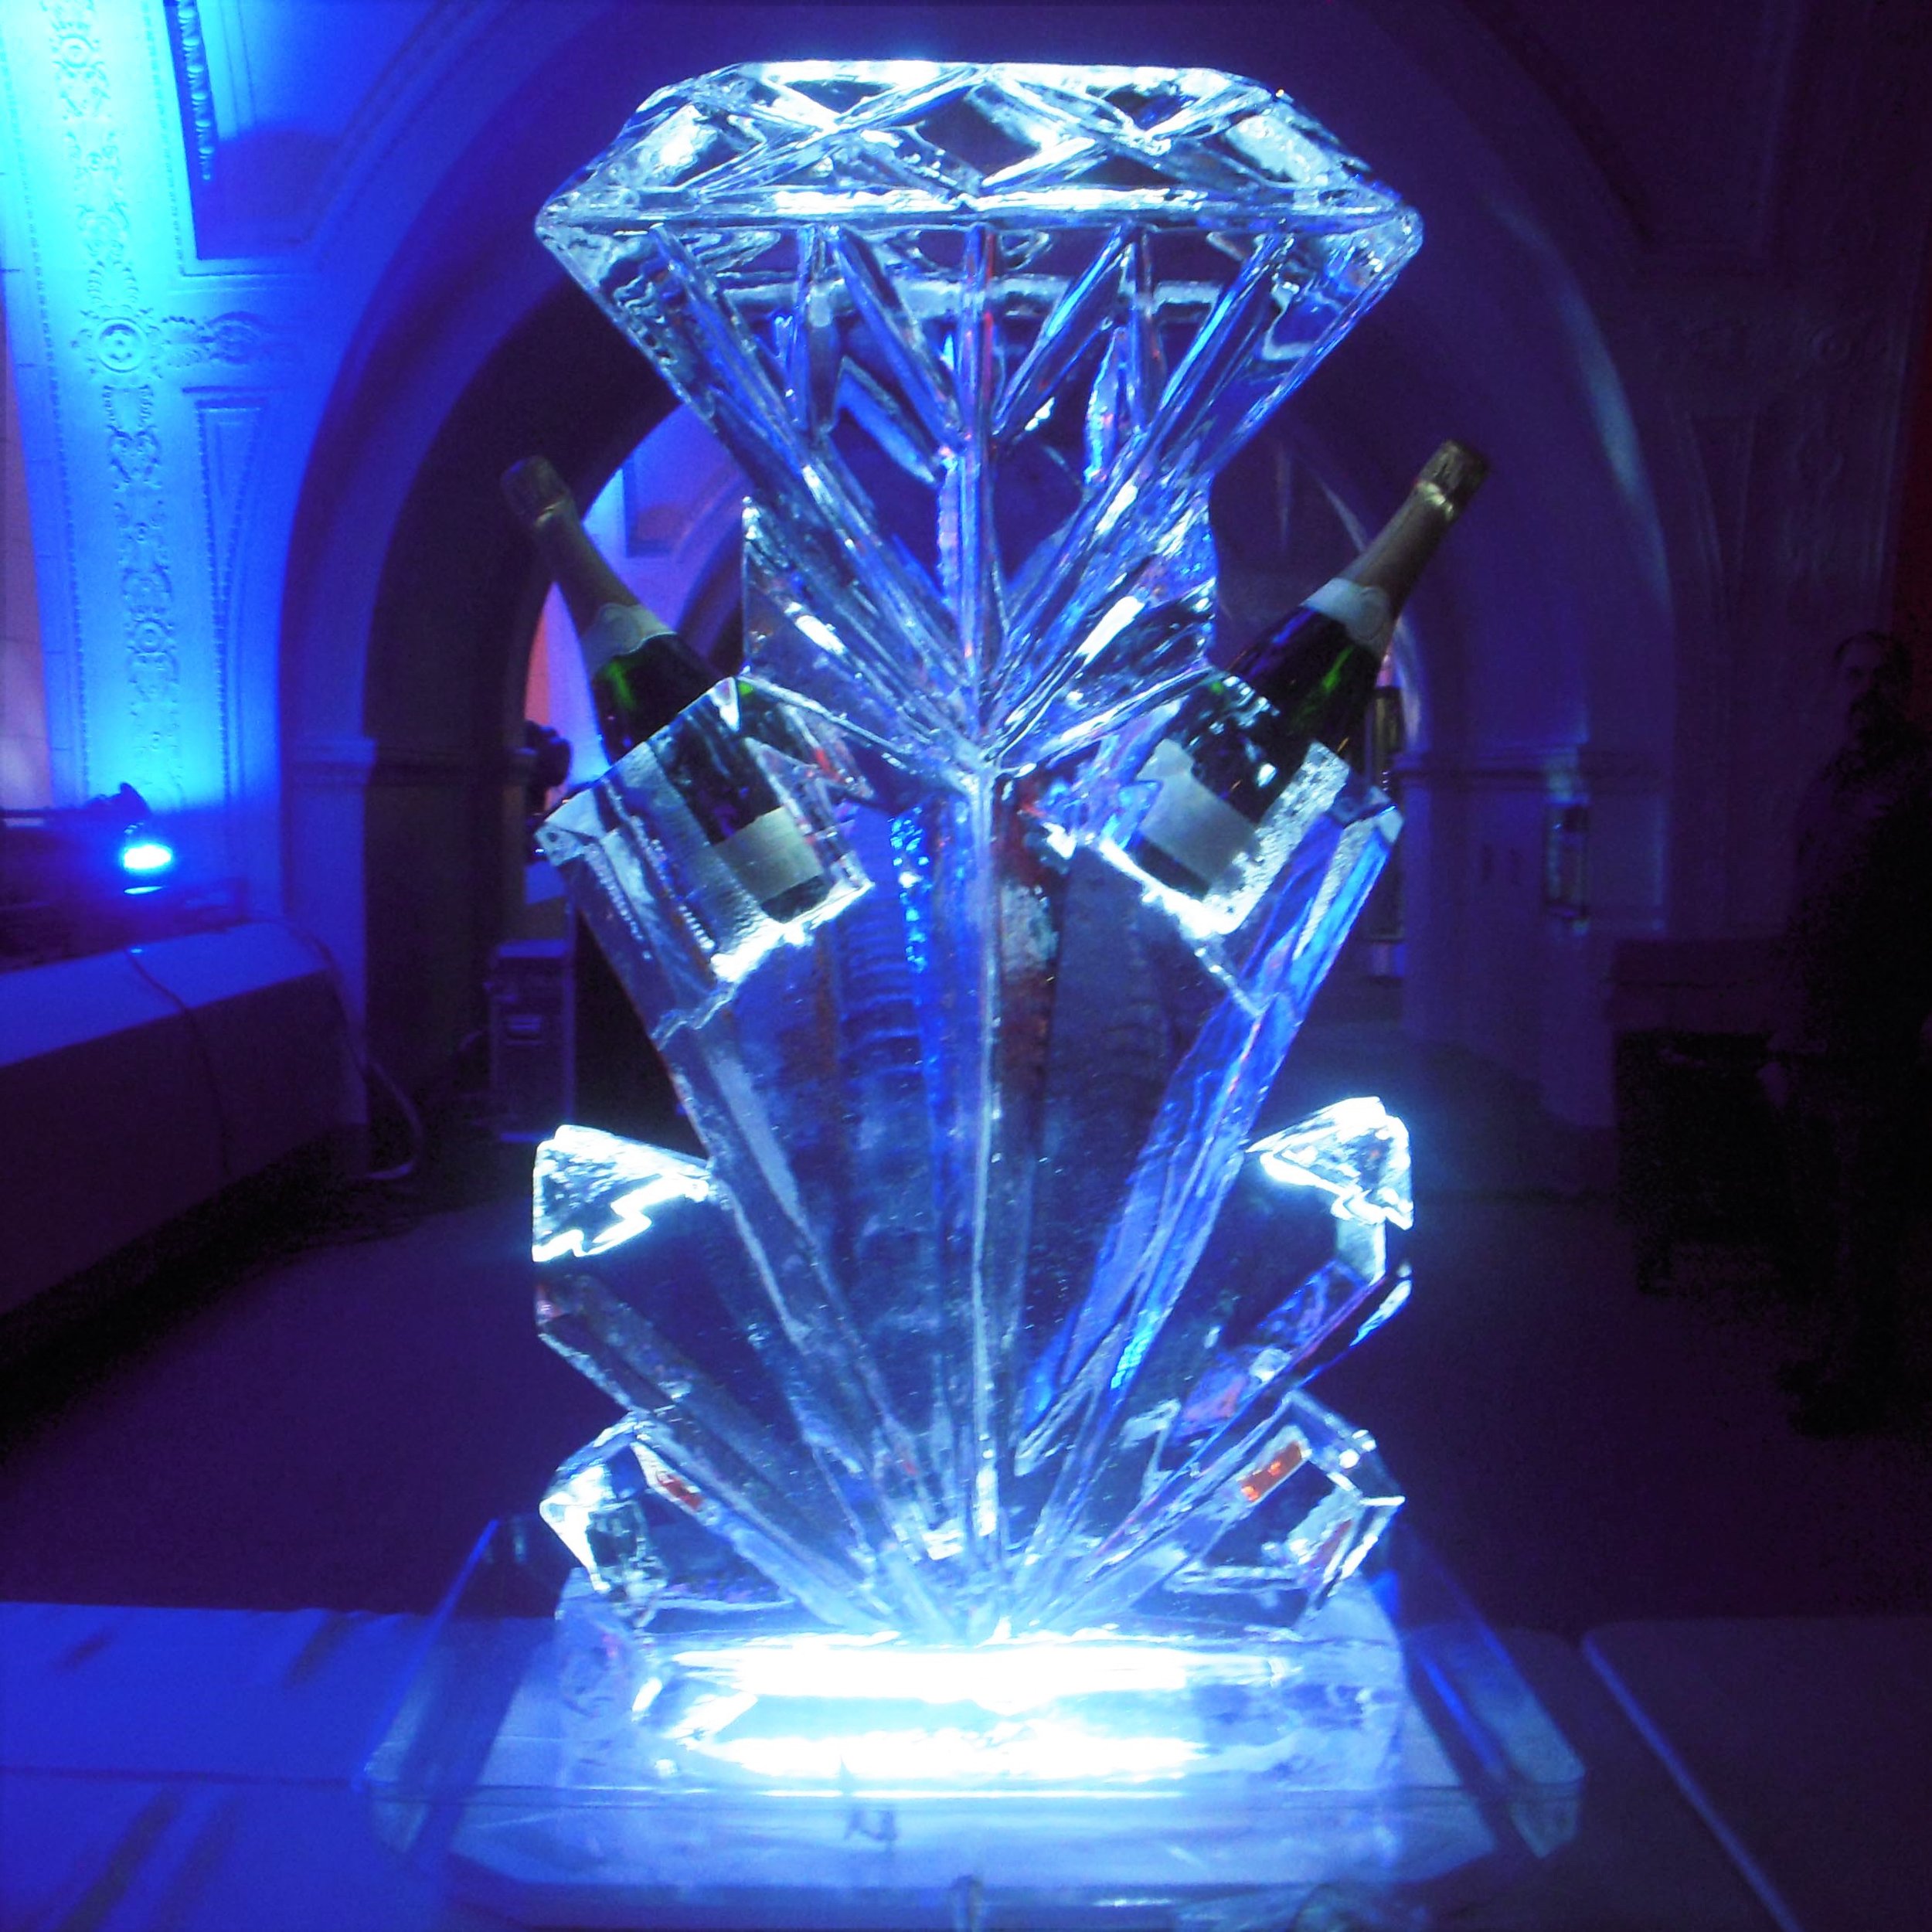 Variety of party-themed ice sculptures